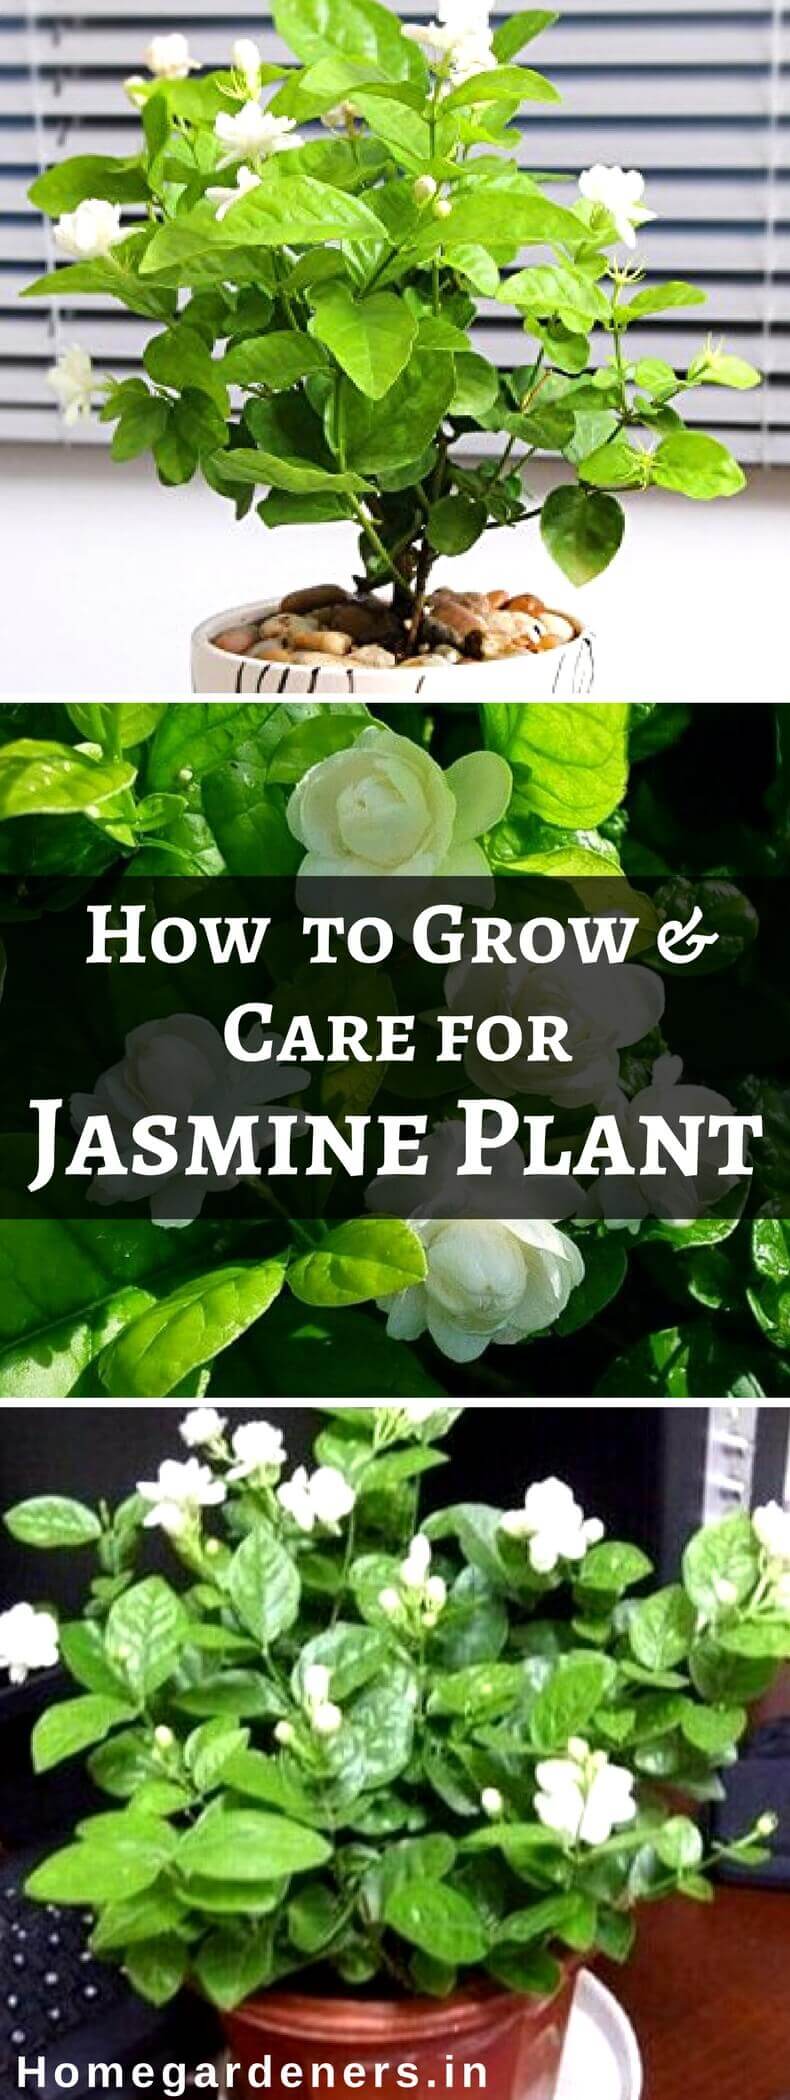 How to Grow and Care for Jasmine Plant?